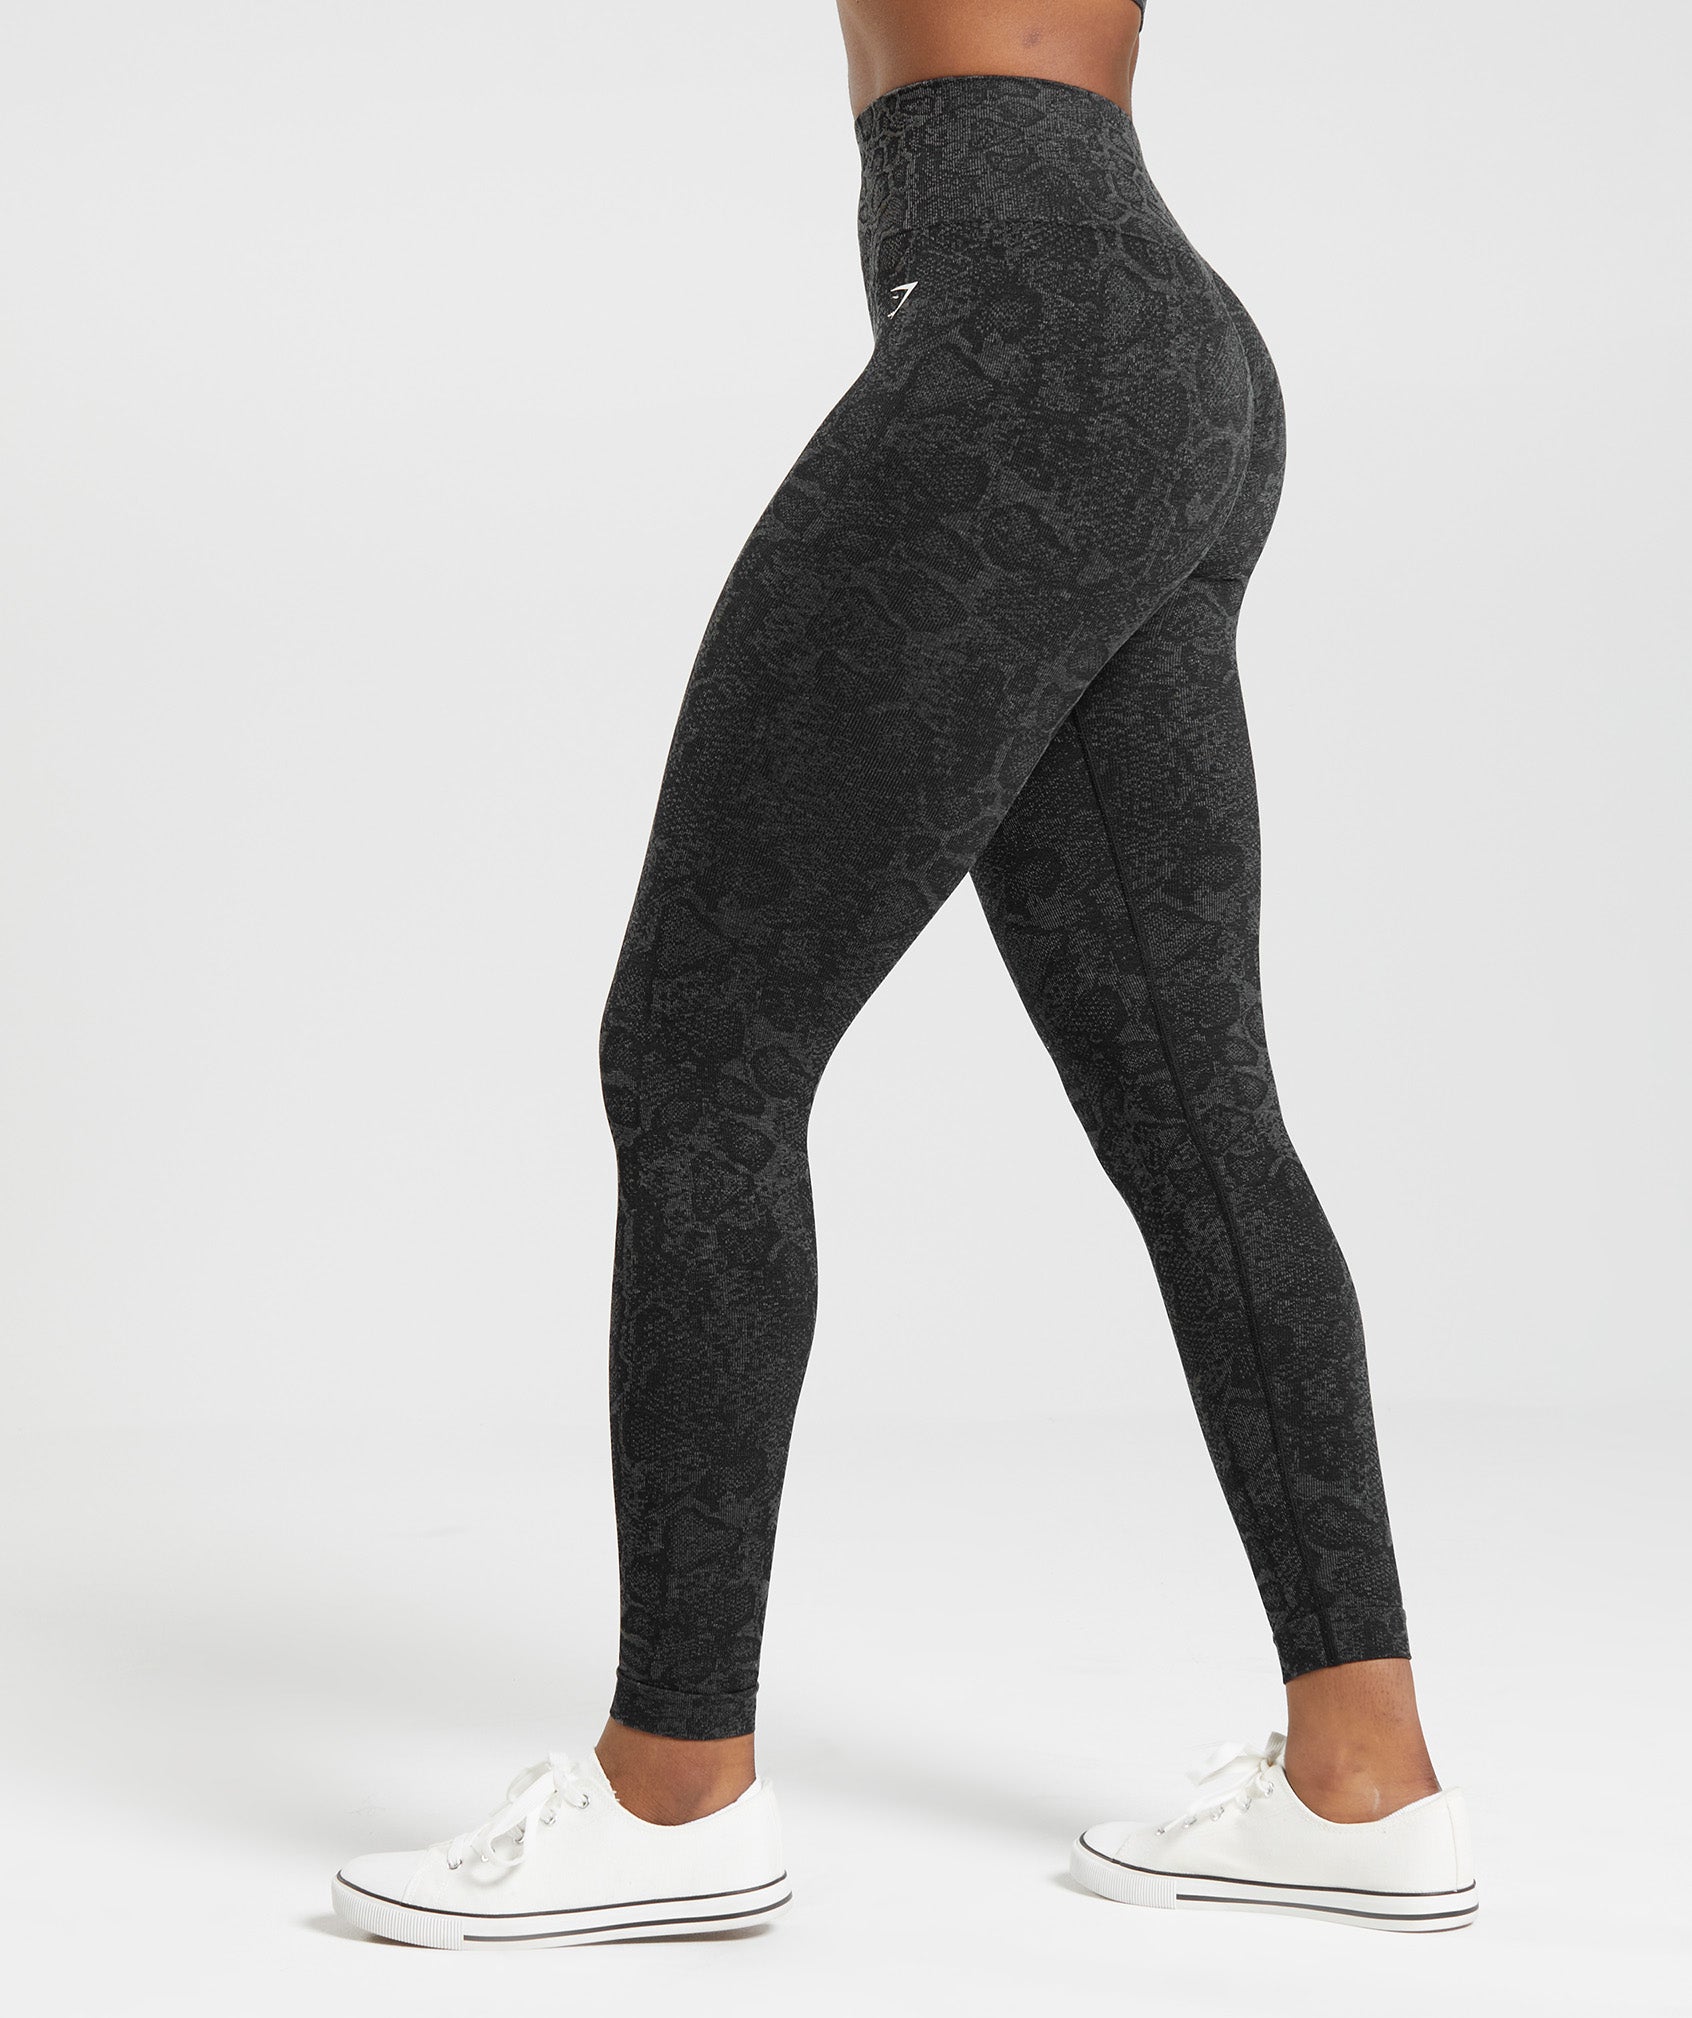 Gymshark Energy Seamless Legging Red - $18 (64% Off Retail) - From Maddy